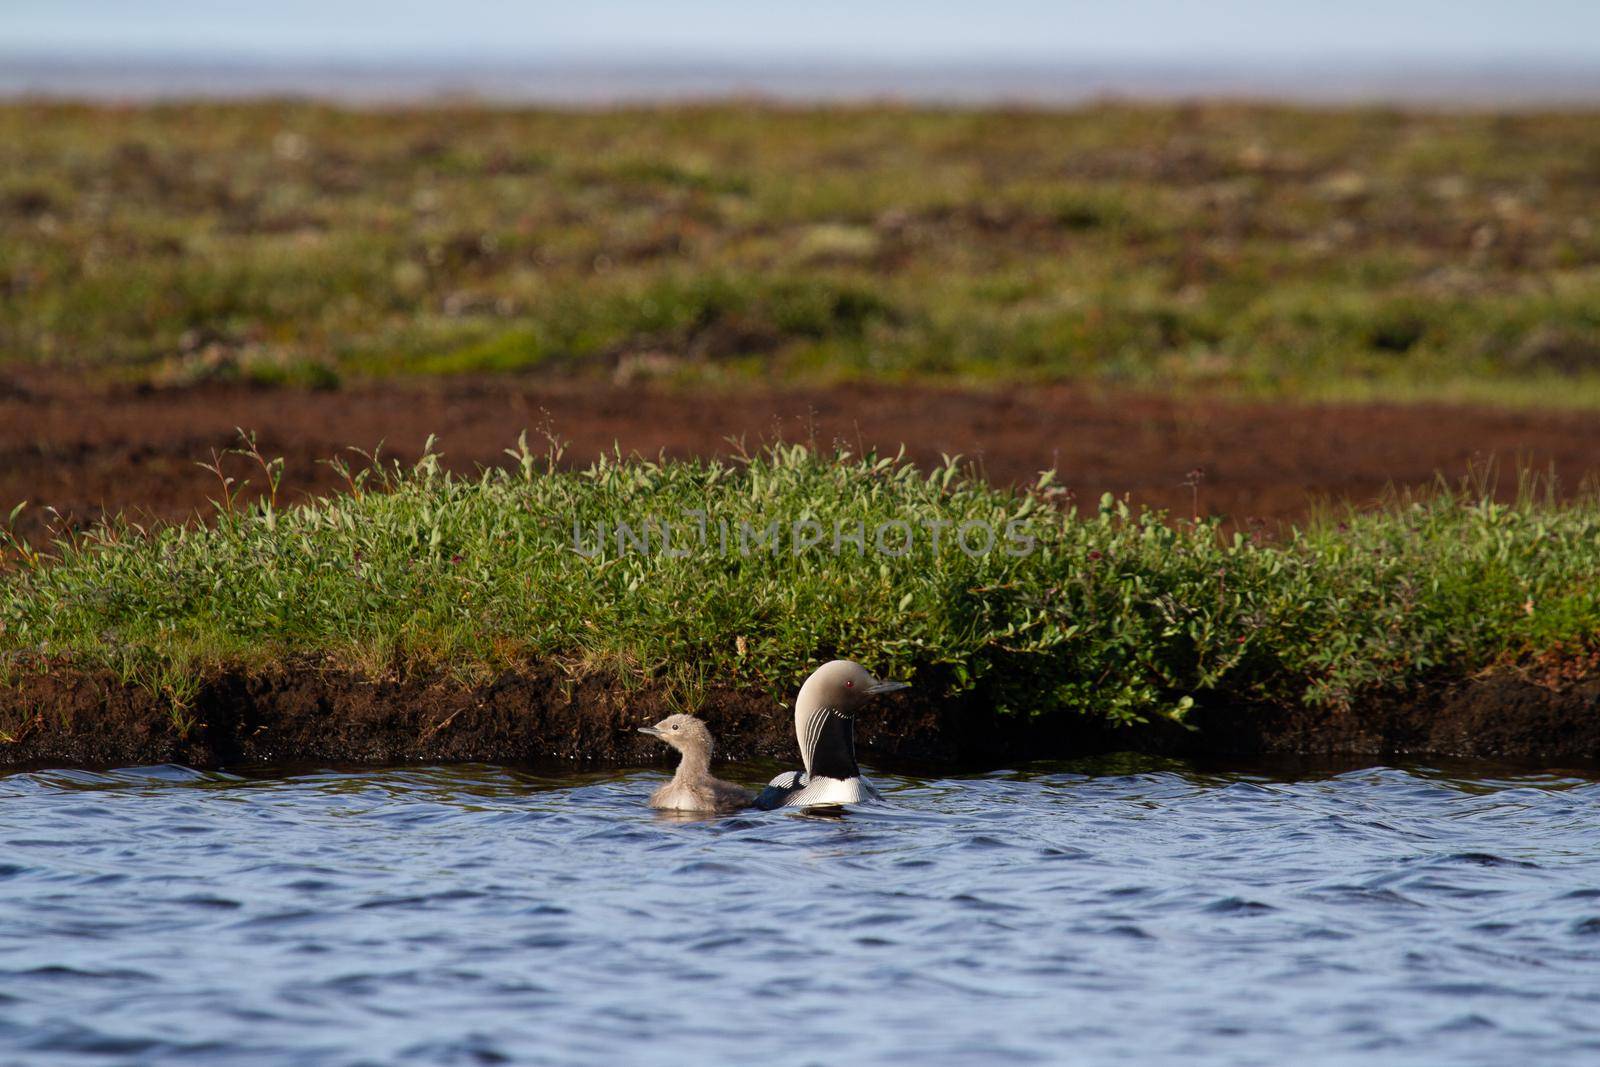 Adult Pacific Loon or Pacific Diver and juvenile swimming around in an arctic lake with willows in the background by Granchinho